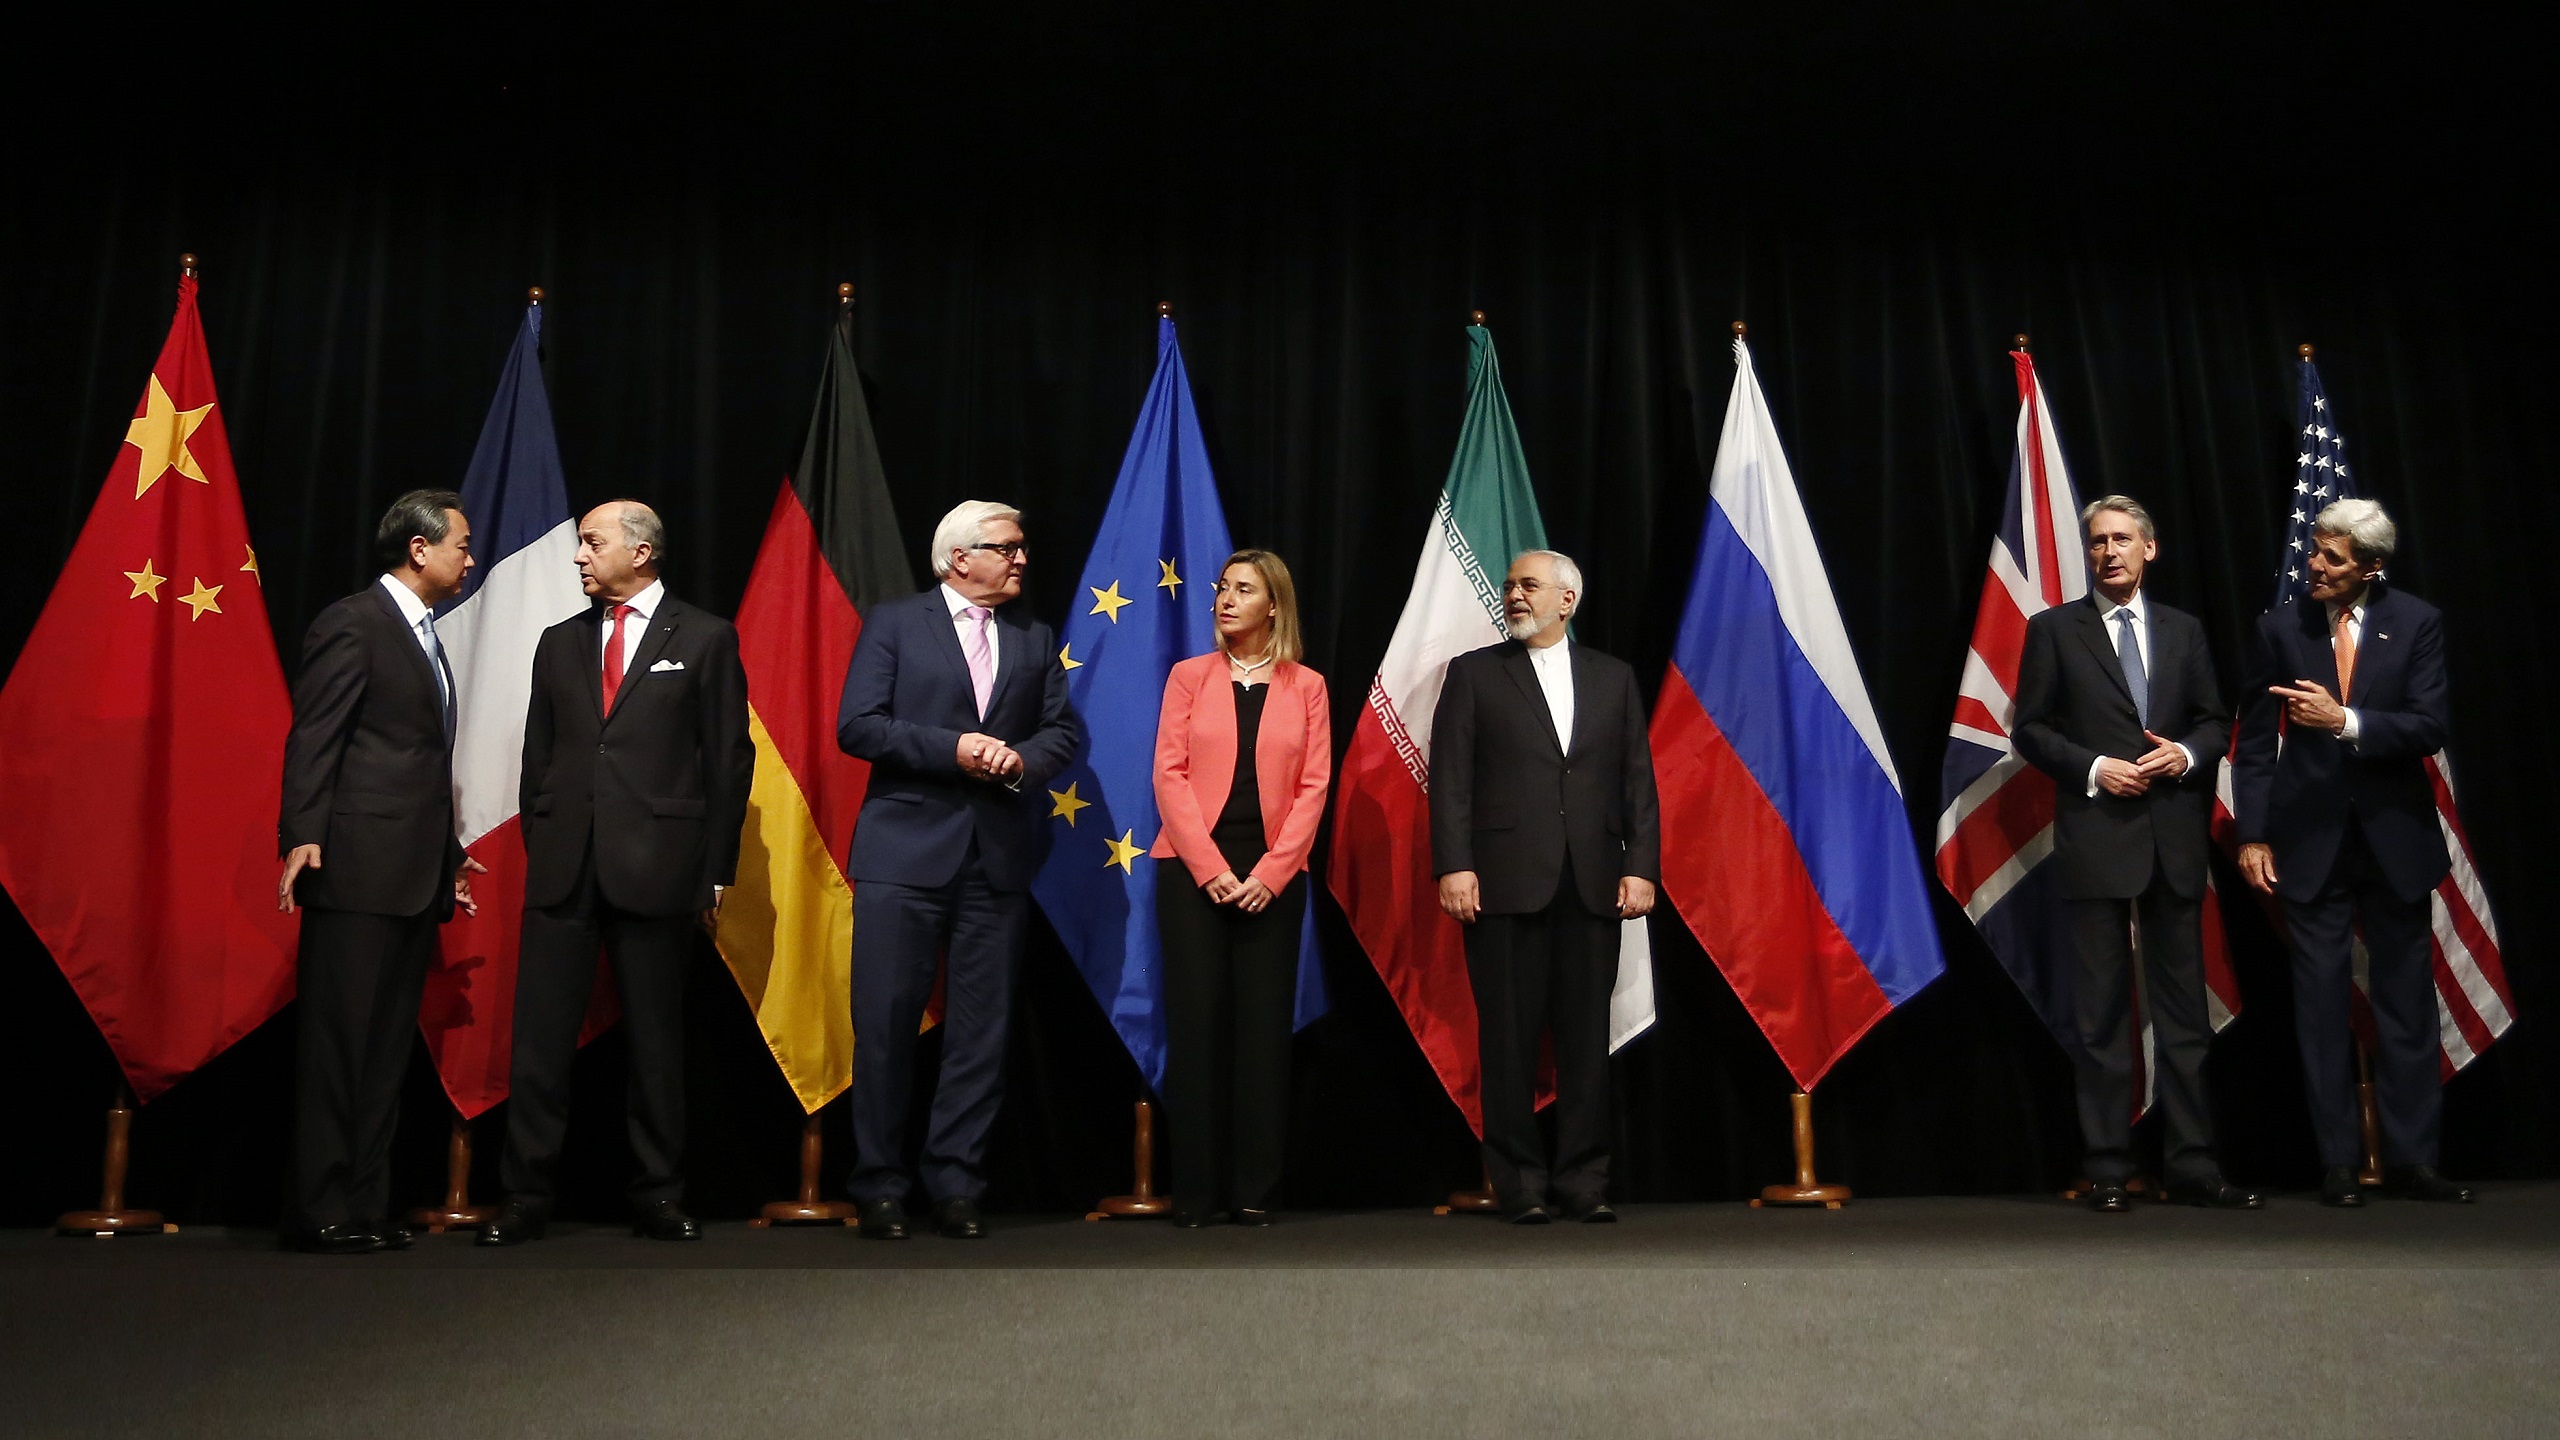 Iran Nixes Nuclear Talks With West, For Now 